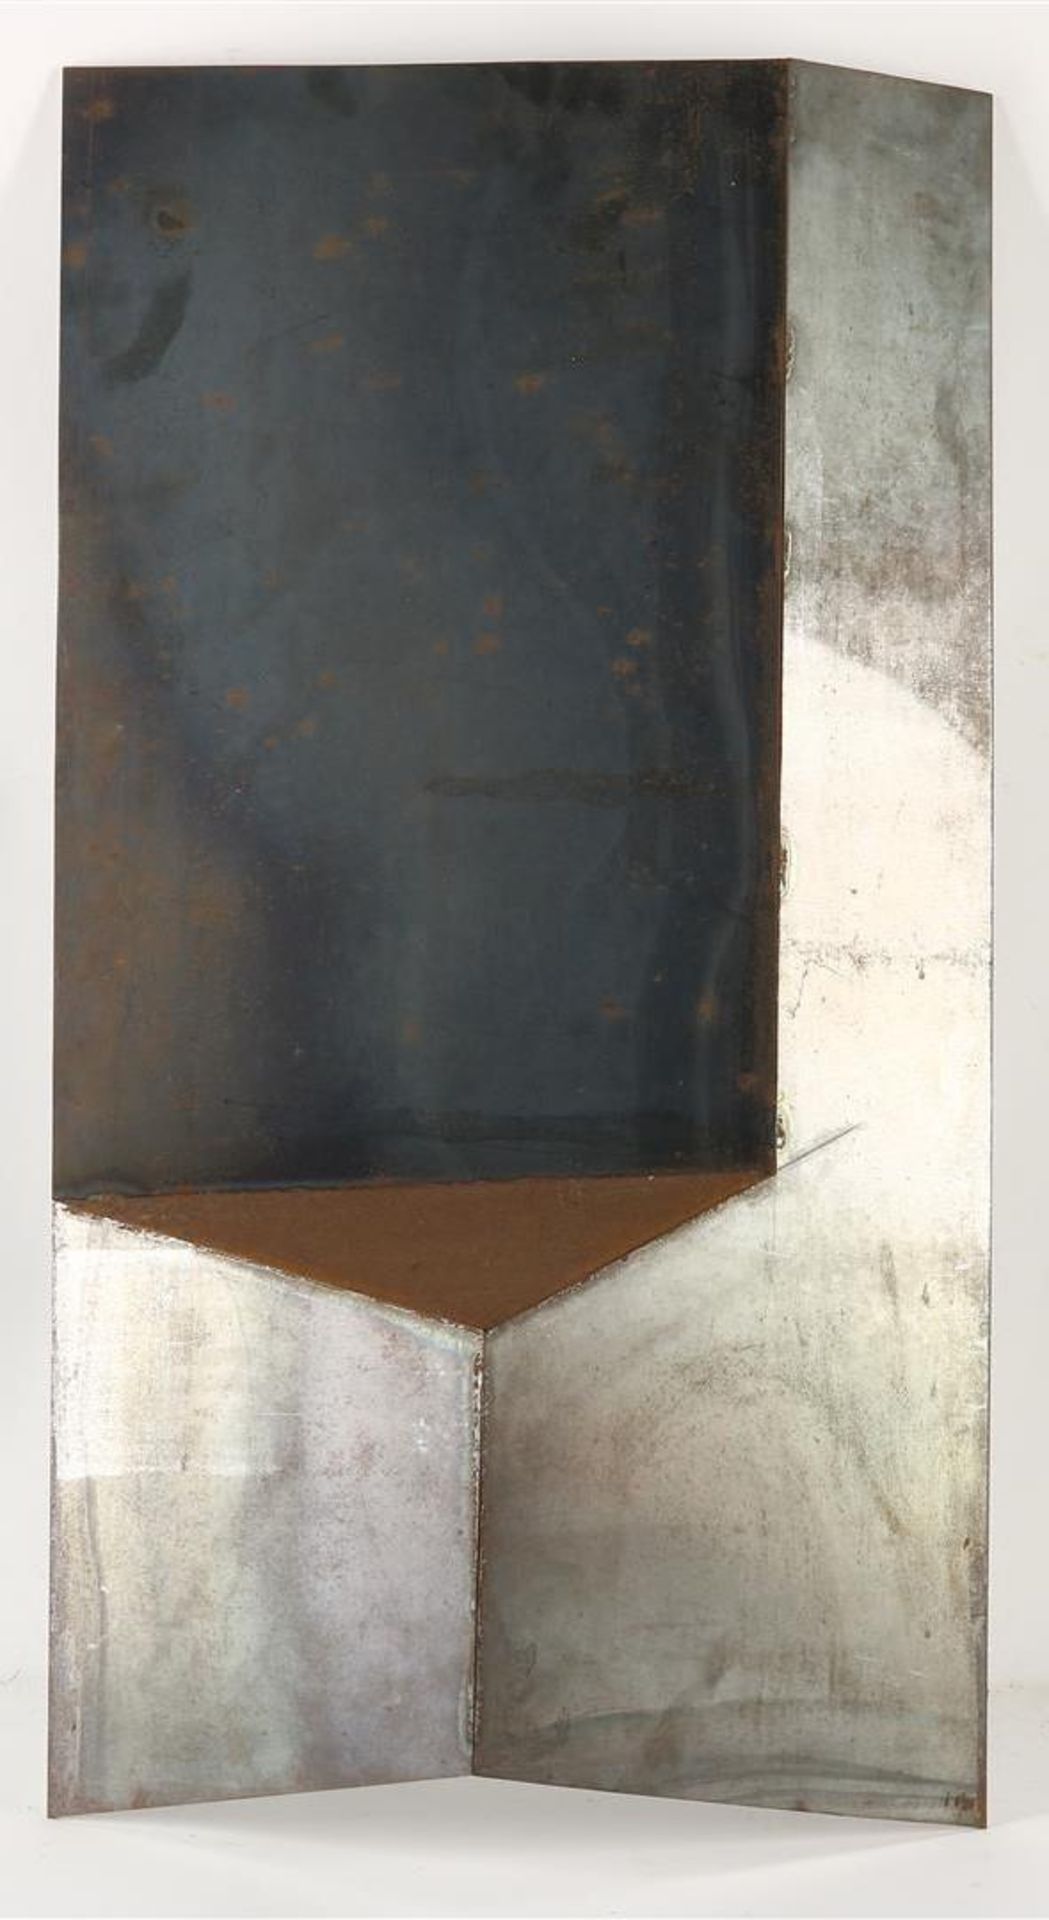 Heiner Thiel (1957-) Metal wall sculpture, signed and dated '89 on the reverse, steel plate87 x 47 x